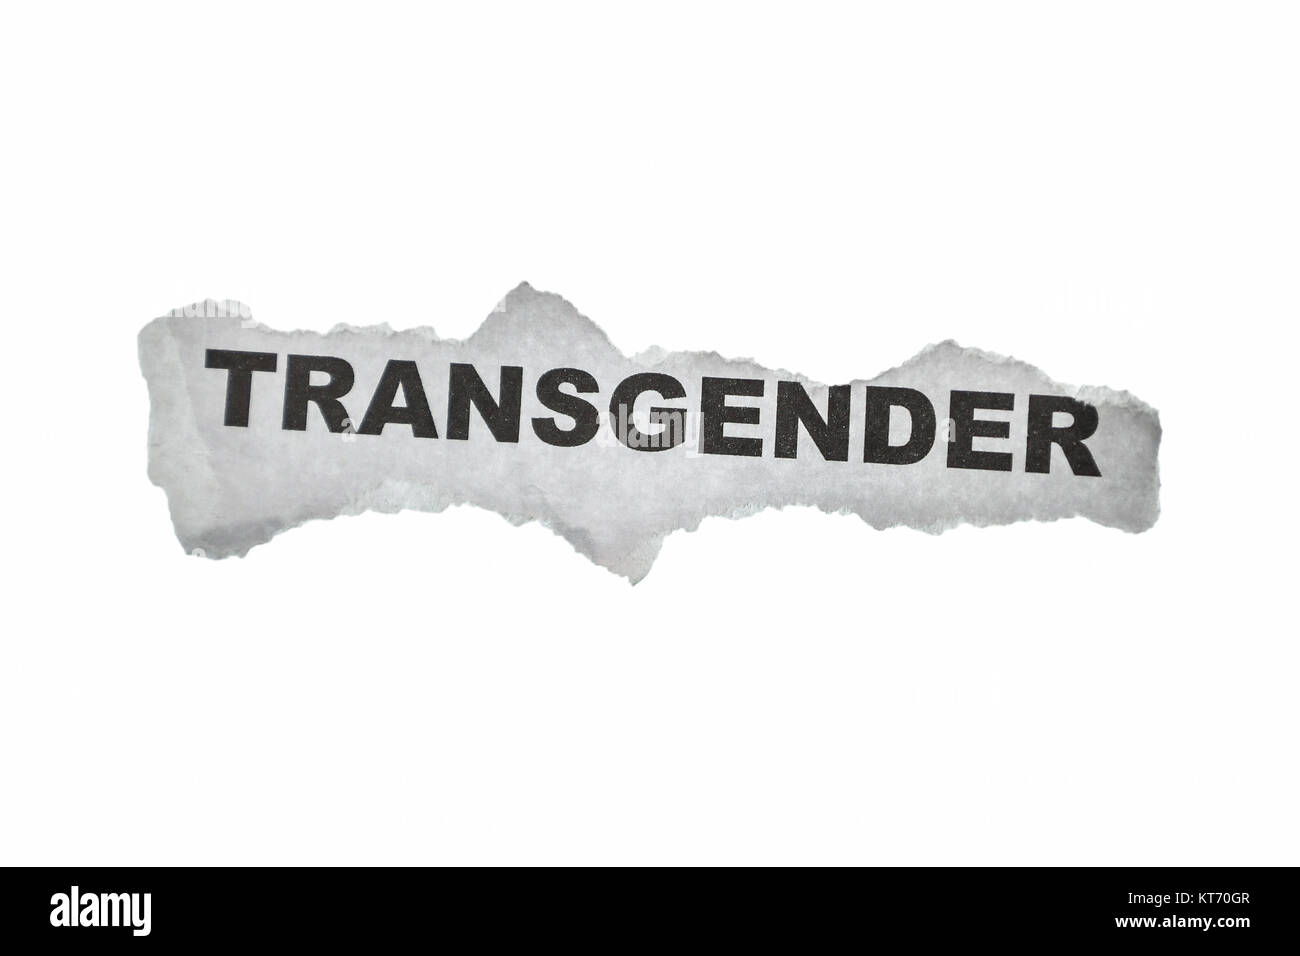 Torn paper with the word Transgender on it Stock Photo